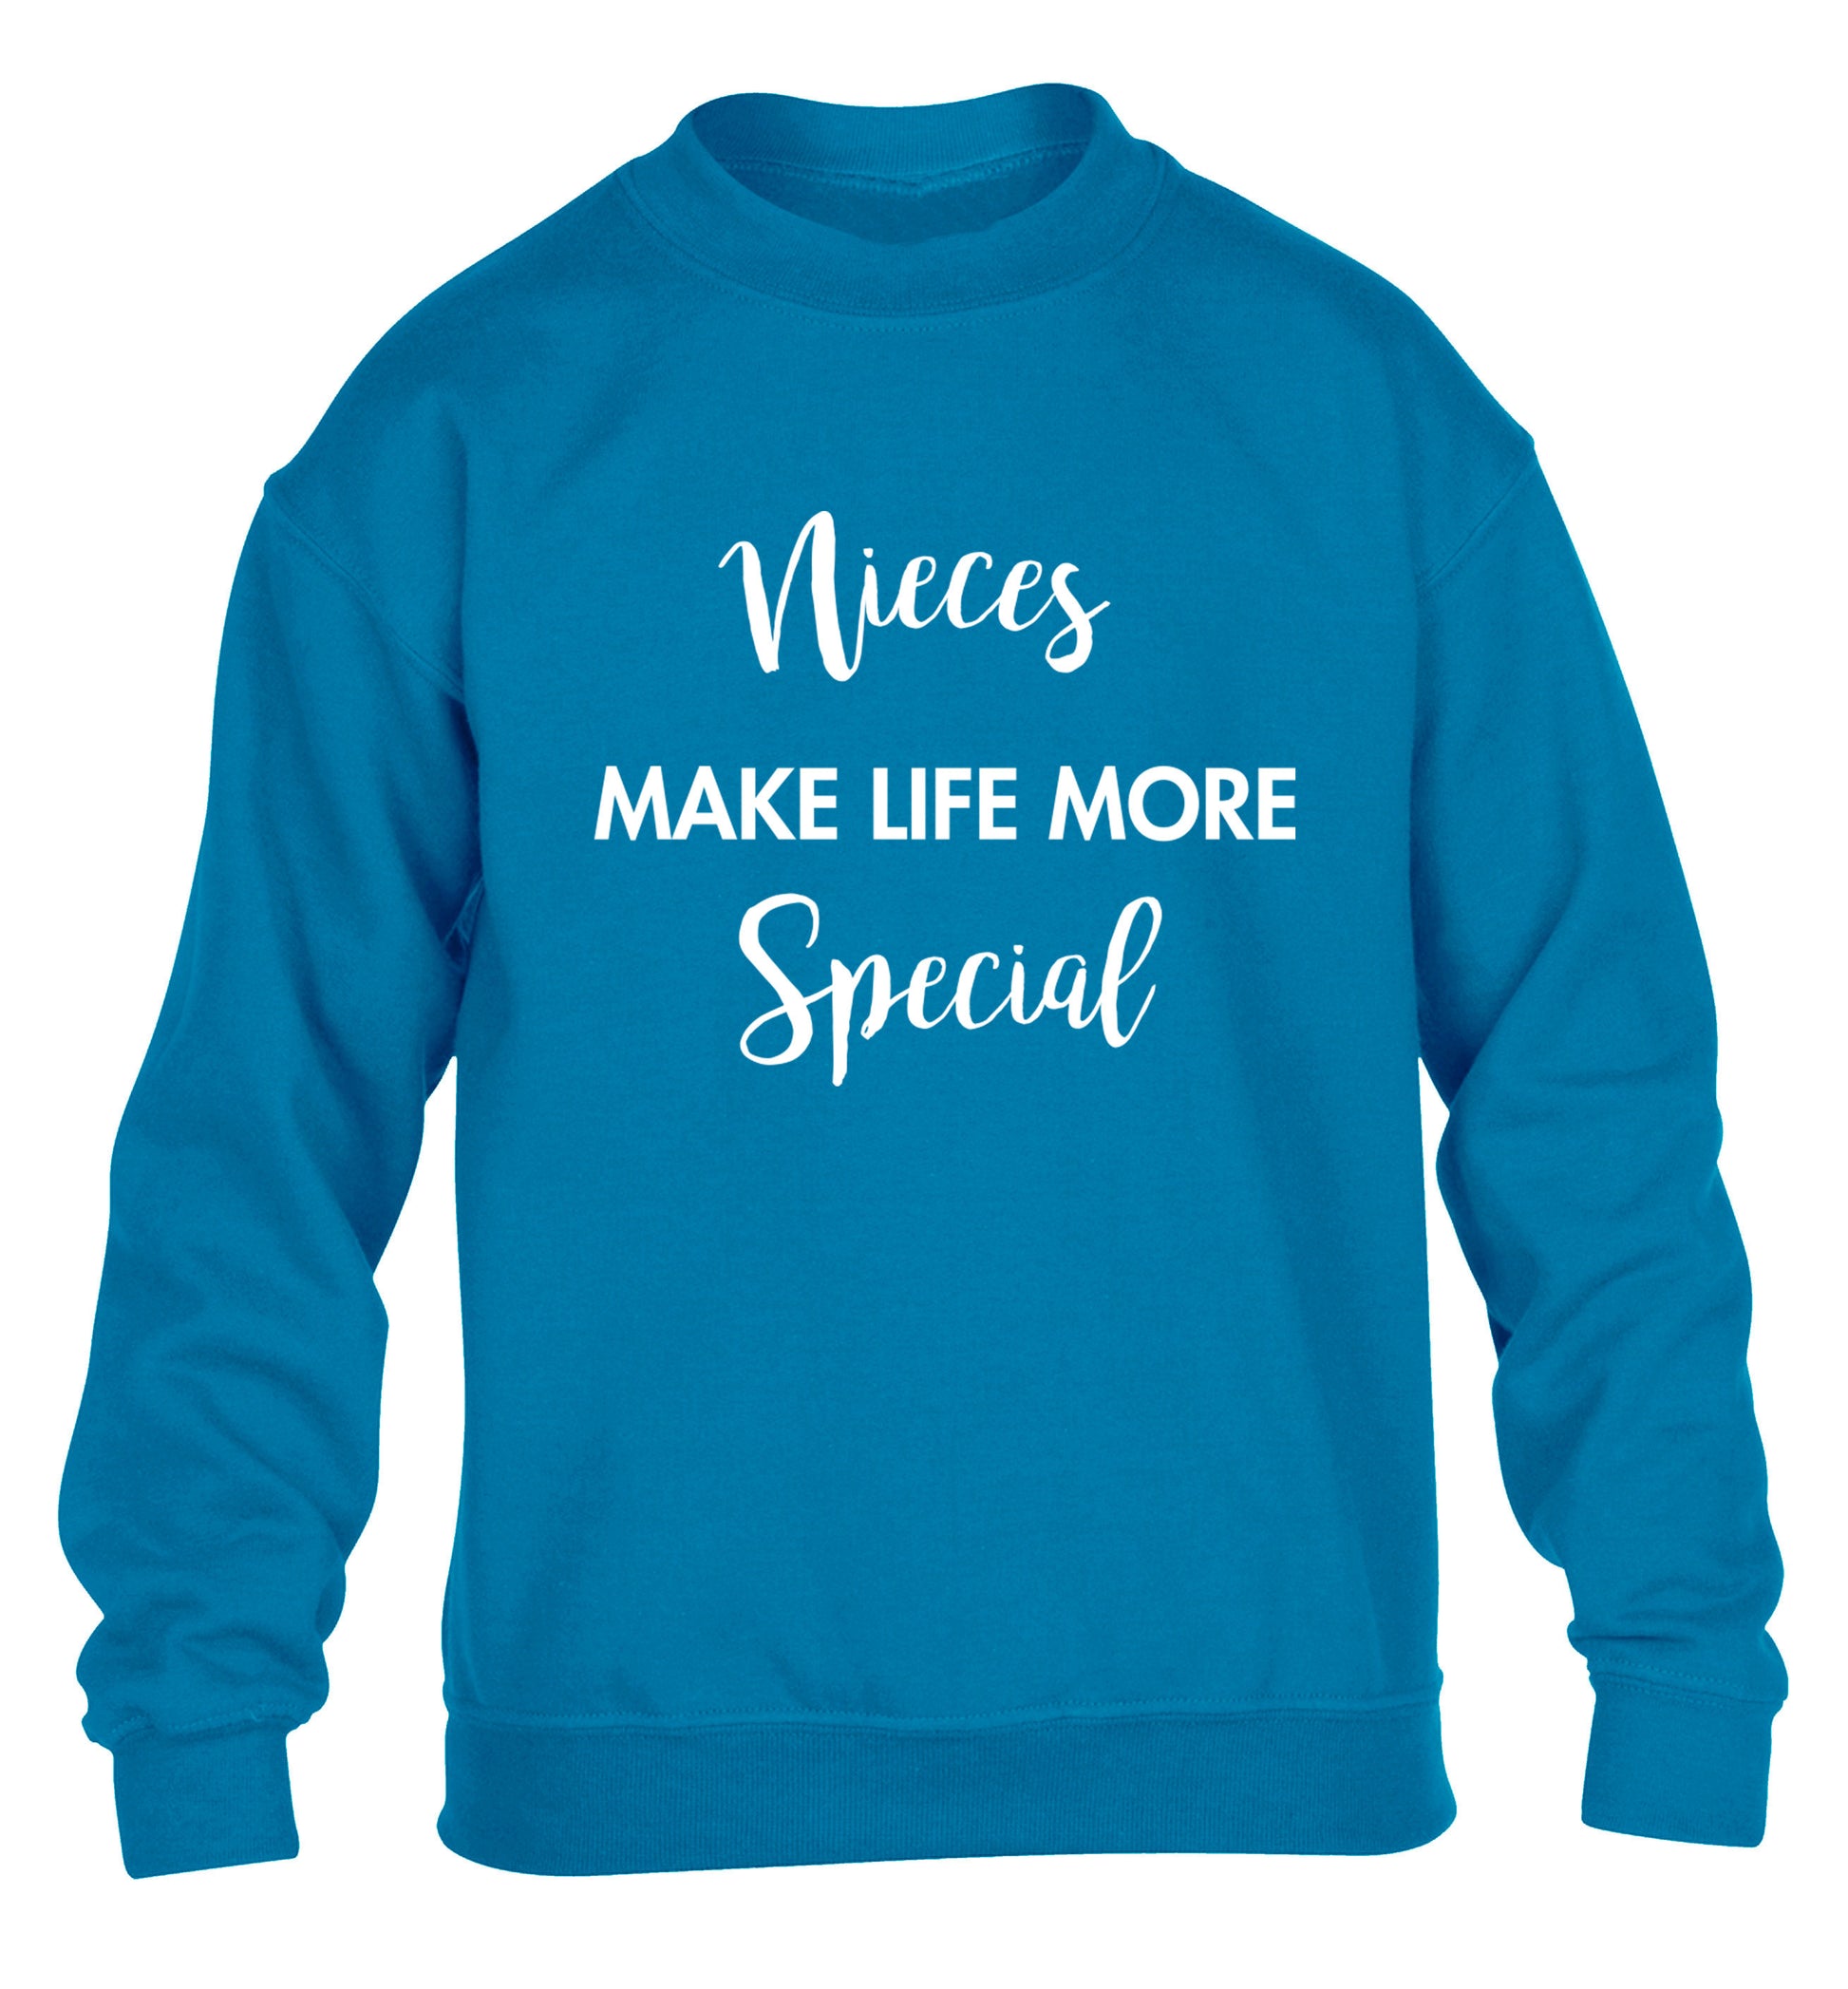 Nieces make life more special children's blue sweater 12-14 Years